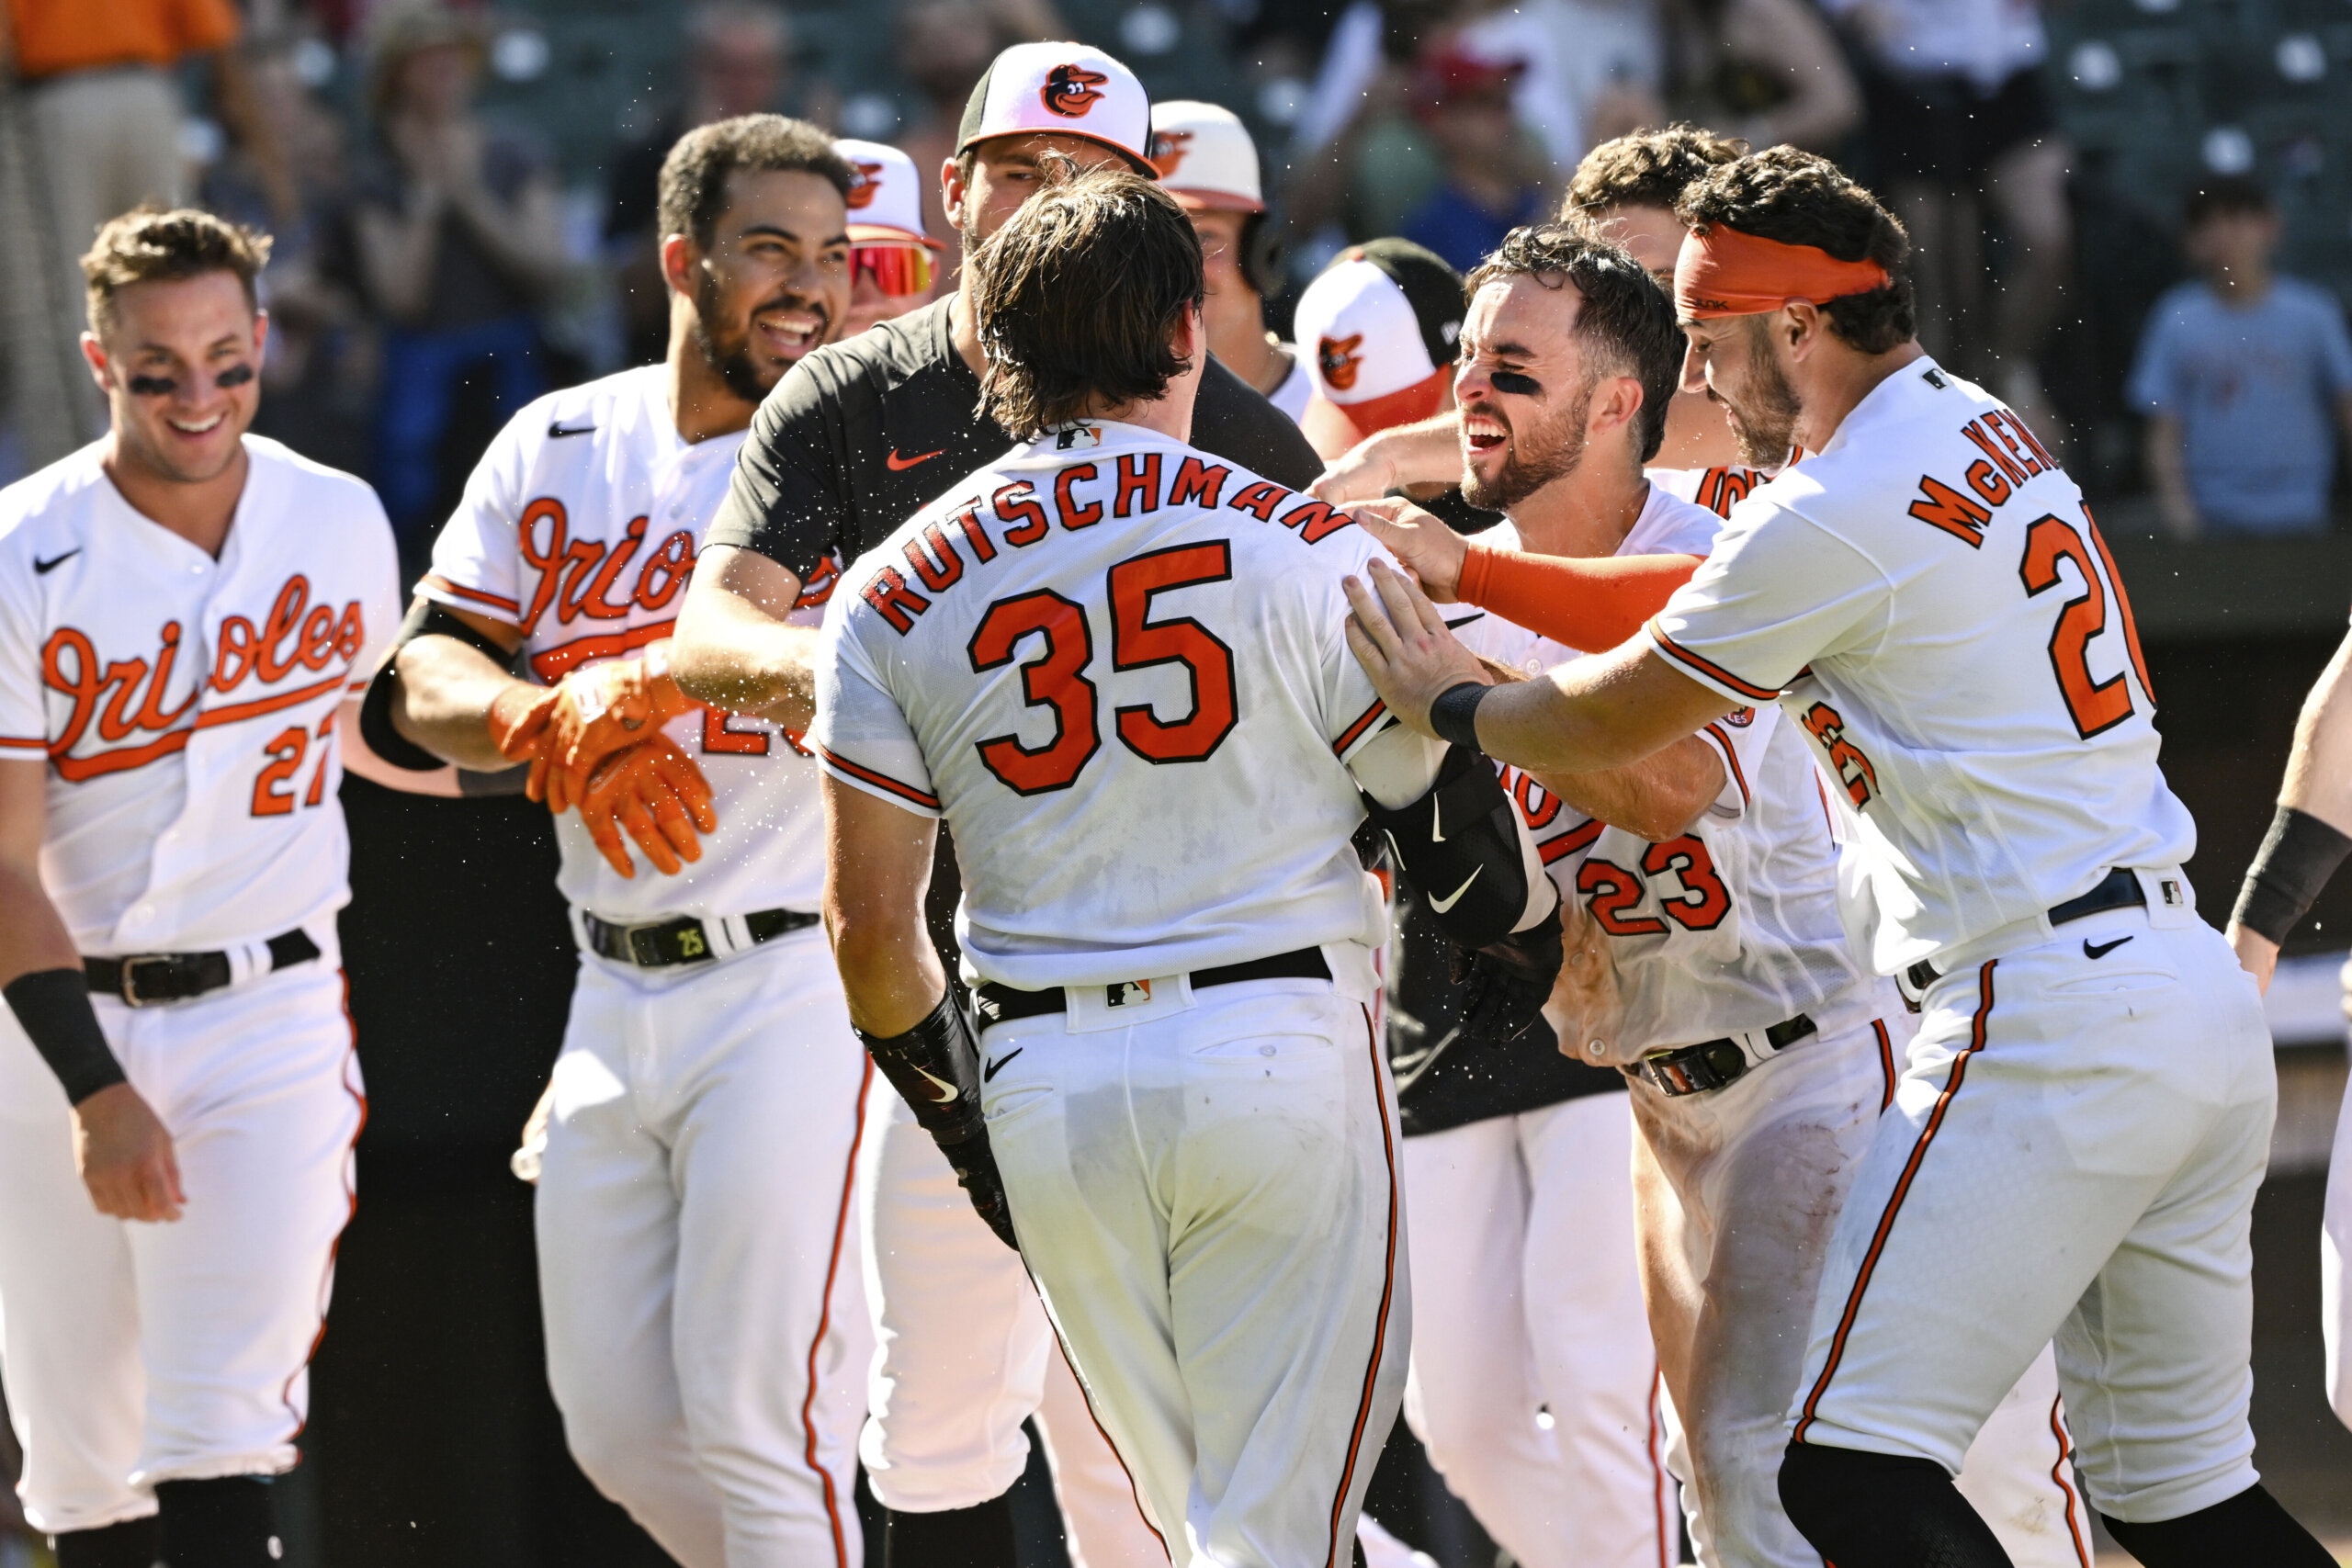 Rutschman homers in 9th to lift O's past A's, 8-7 - WTOP News